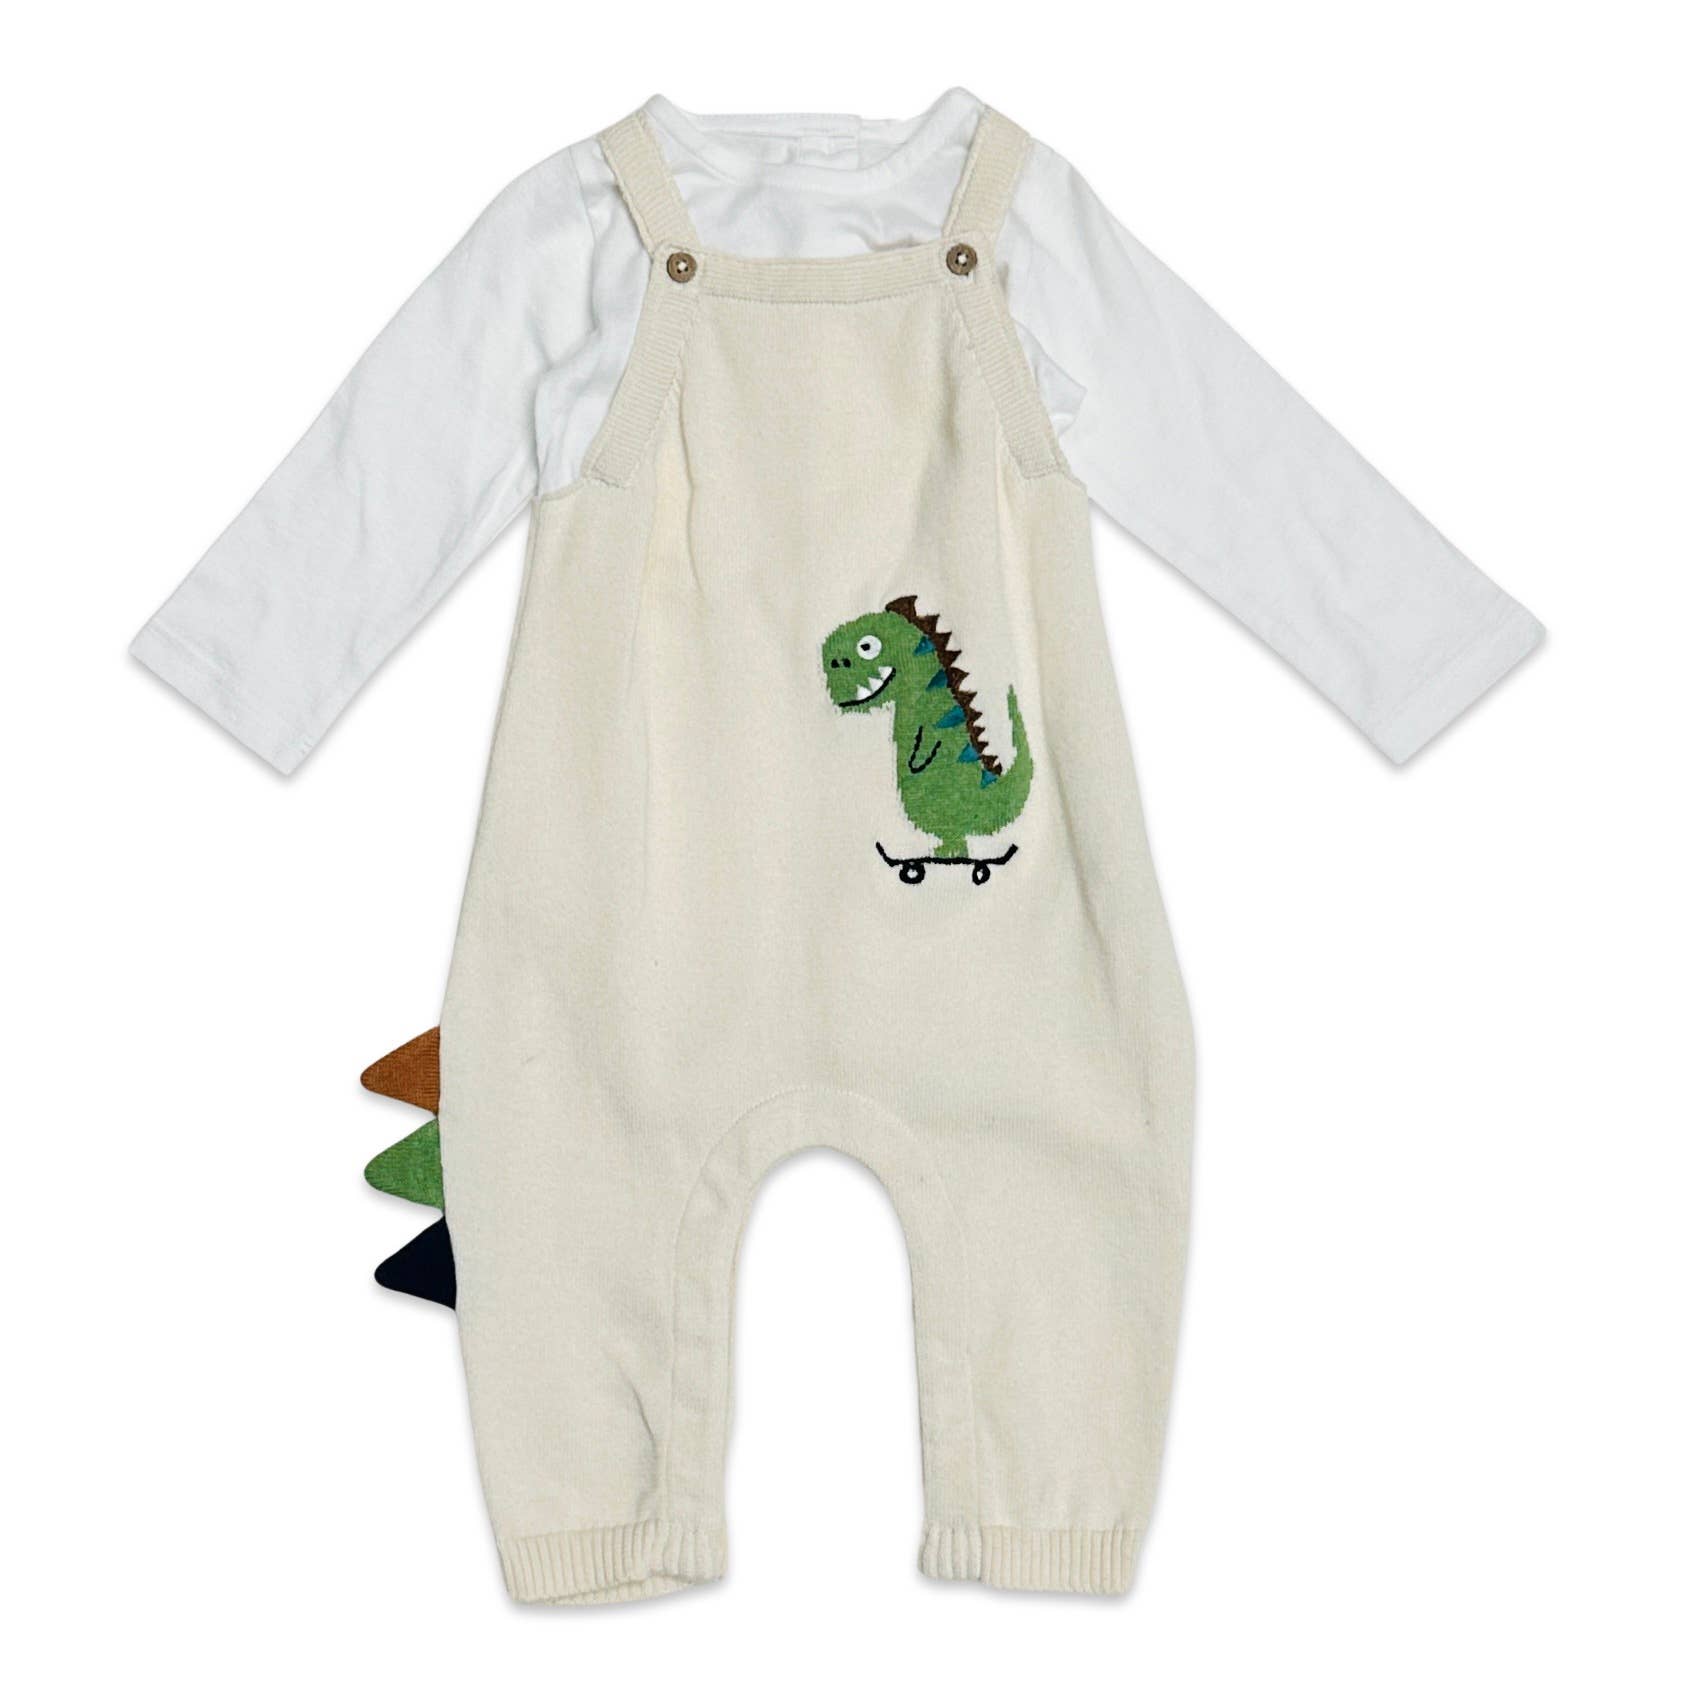 <p>Introducing our adorable Dino Jacquard Knit Baby Overall Set! Made from 100% organic cotton, this ultra-soft romper features an embroidered dinosaur on the front. The sides even have cute dinosaur spikes that add an extra touch of charm. Natural in color and perfect for all seasons, this lightweight overall set is a must-have for any stylish baby's wardrobe.</p> <p>Ethically produced in India, supporting better livelihoods for small grower farmers. 100% Organic Cotton. 